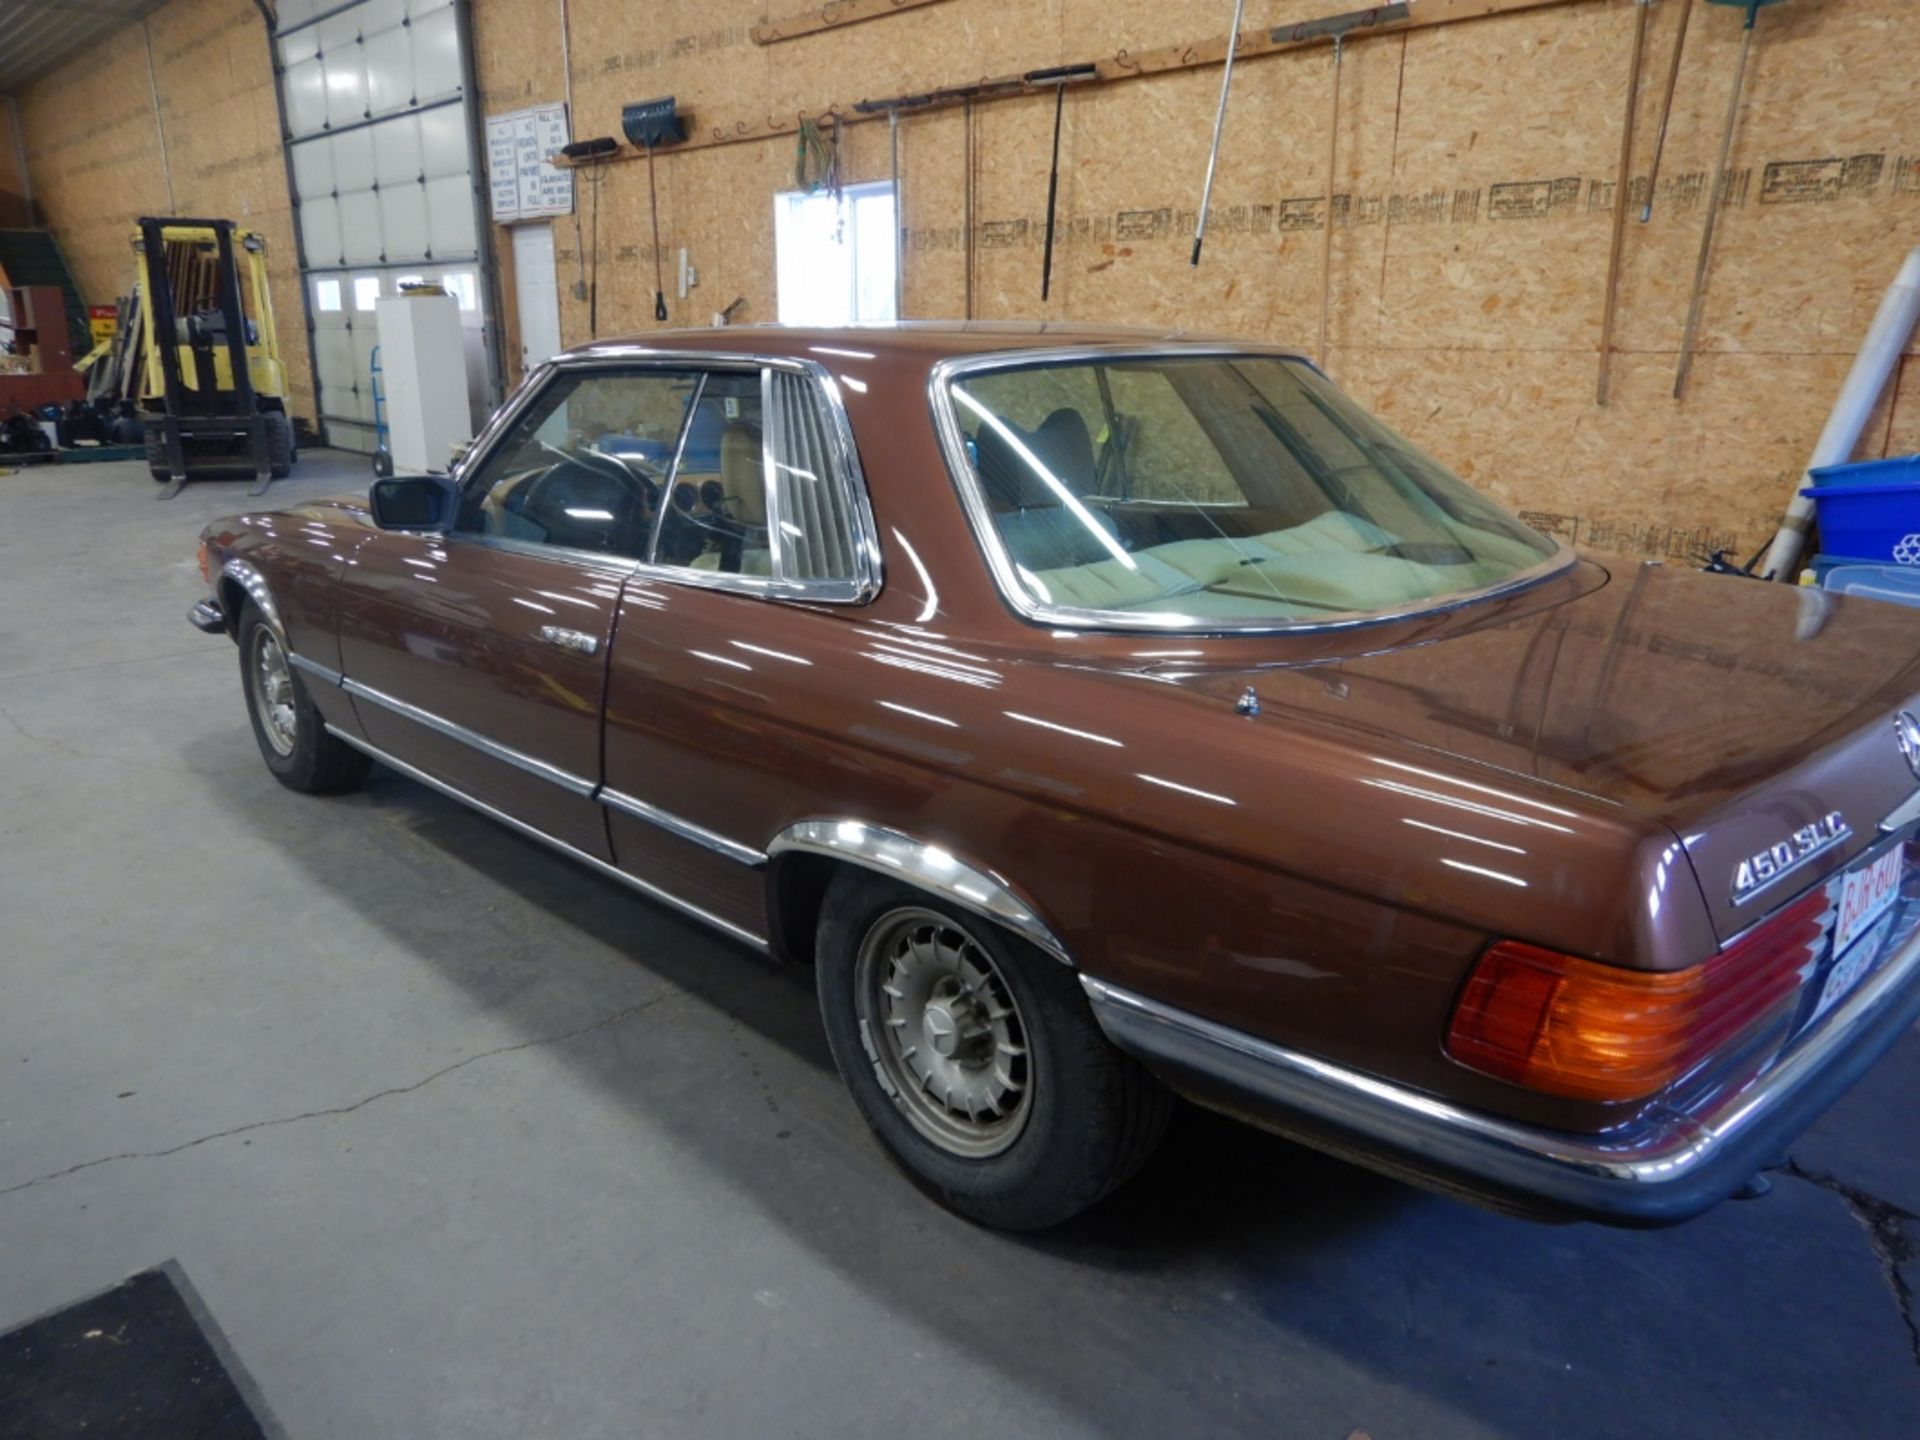 1978 MERCEDES-BENZ 450 SL C COUPE CAR, 2 DR, 2WD, AT, GAS, 227,849KMS, ONE OWNER - Image 17 of 19